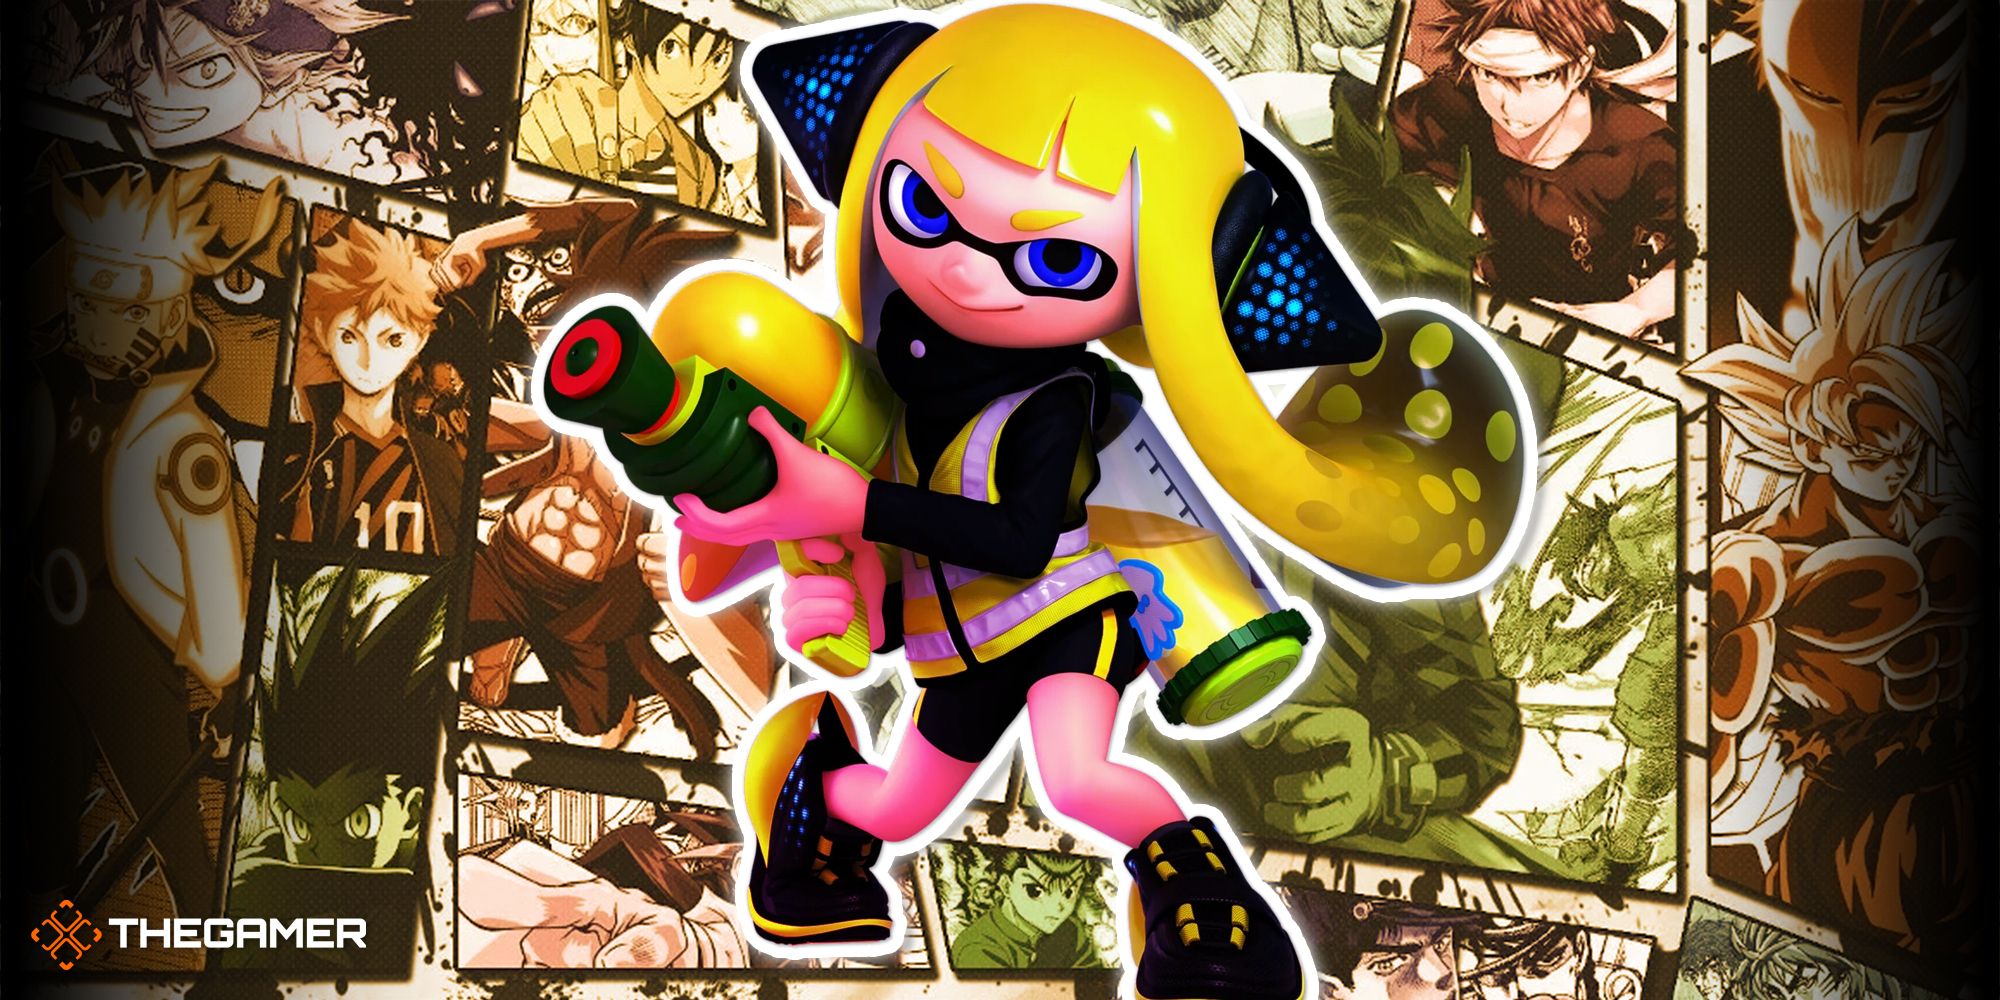 6-A Japanese poll reveals that Splatoon is the most requested anime adaptation